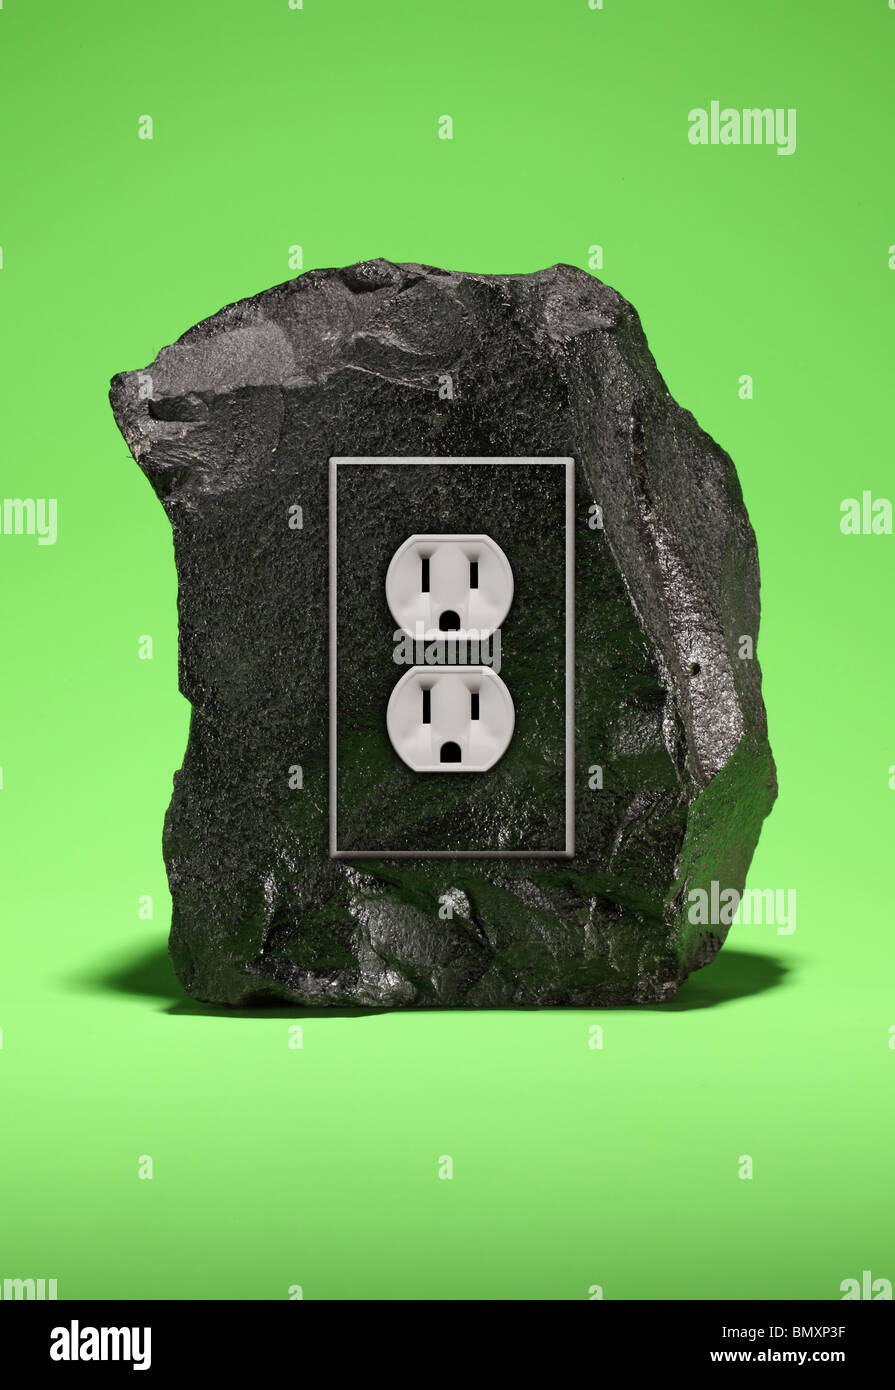 A large black chunk of coal with an electrical power outlet fixture on a bright green background. Stock Photo